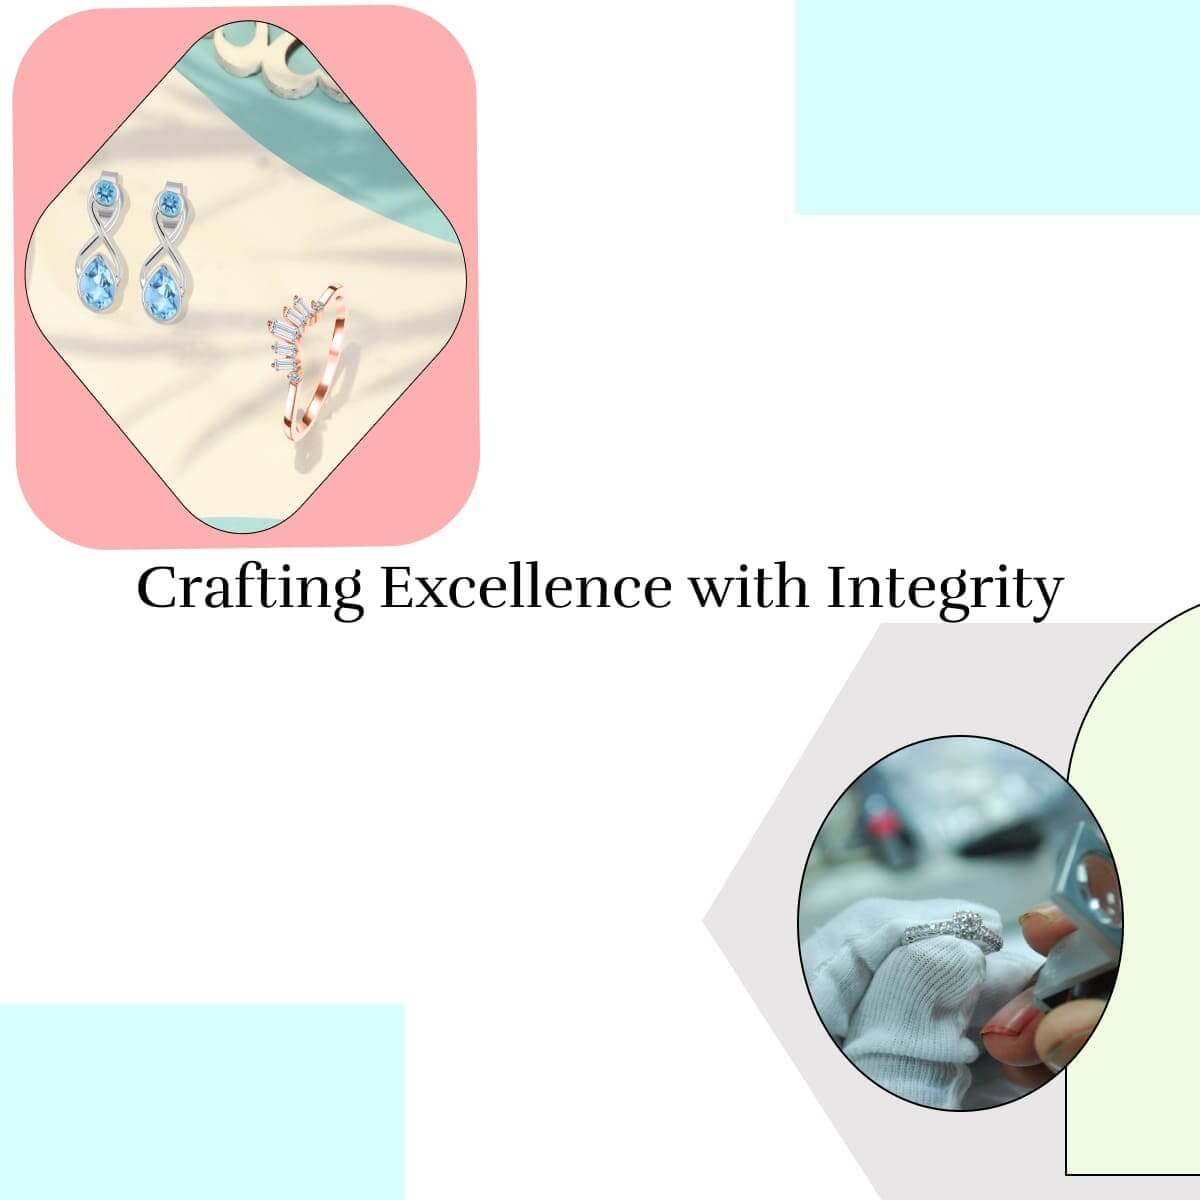 Crafting with Integrity